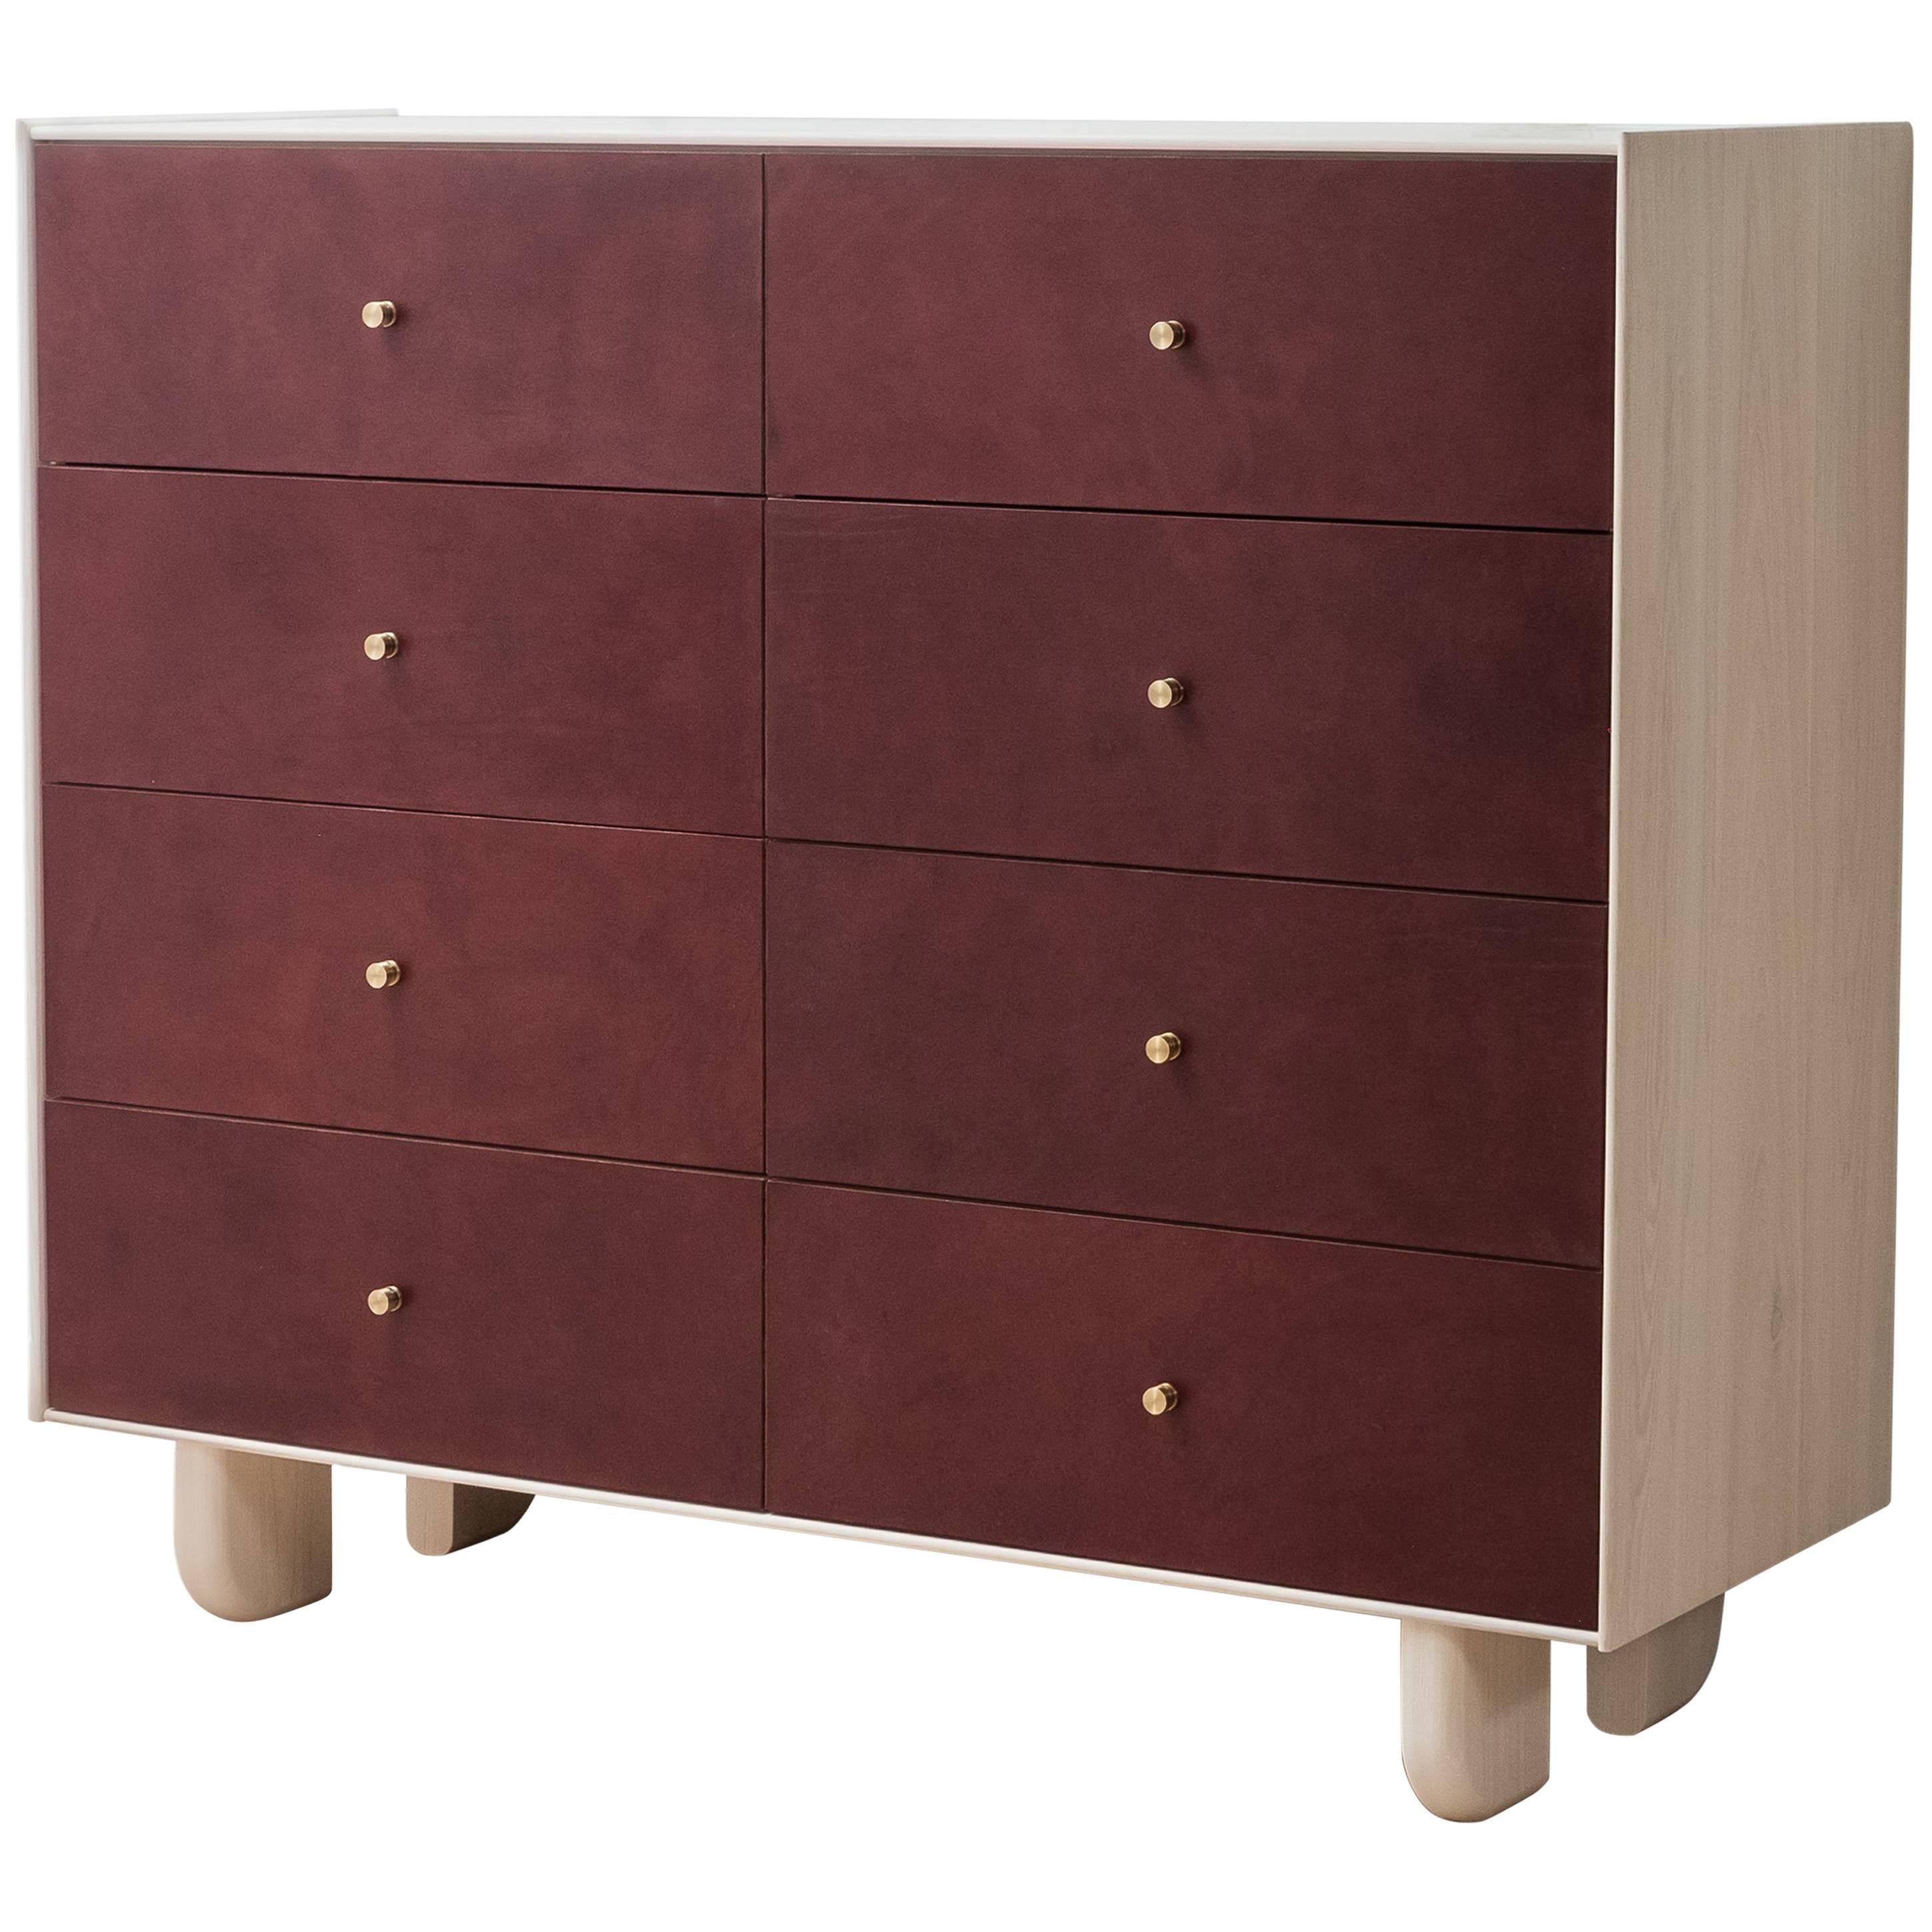 Profile Dresser in Bleached Ash with Burgundy Leather For Sale